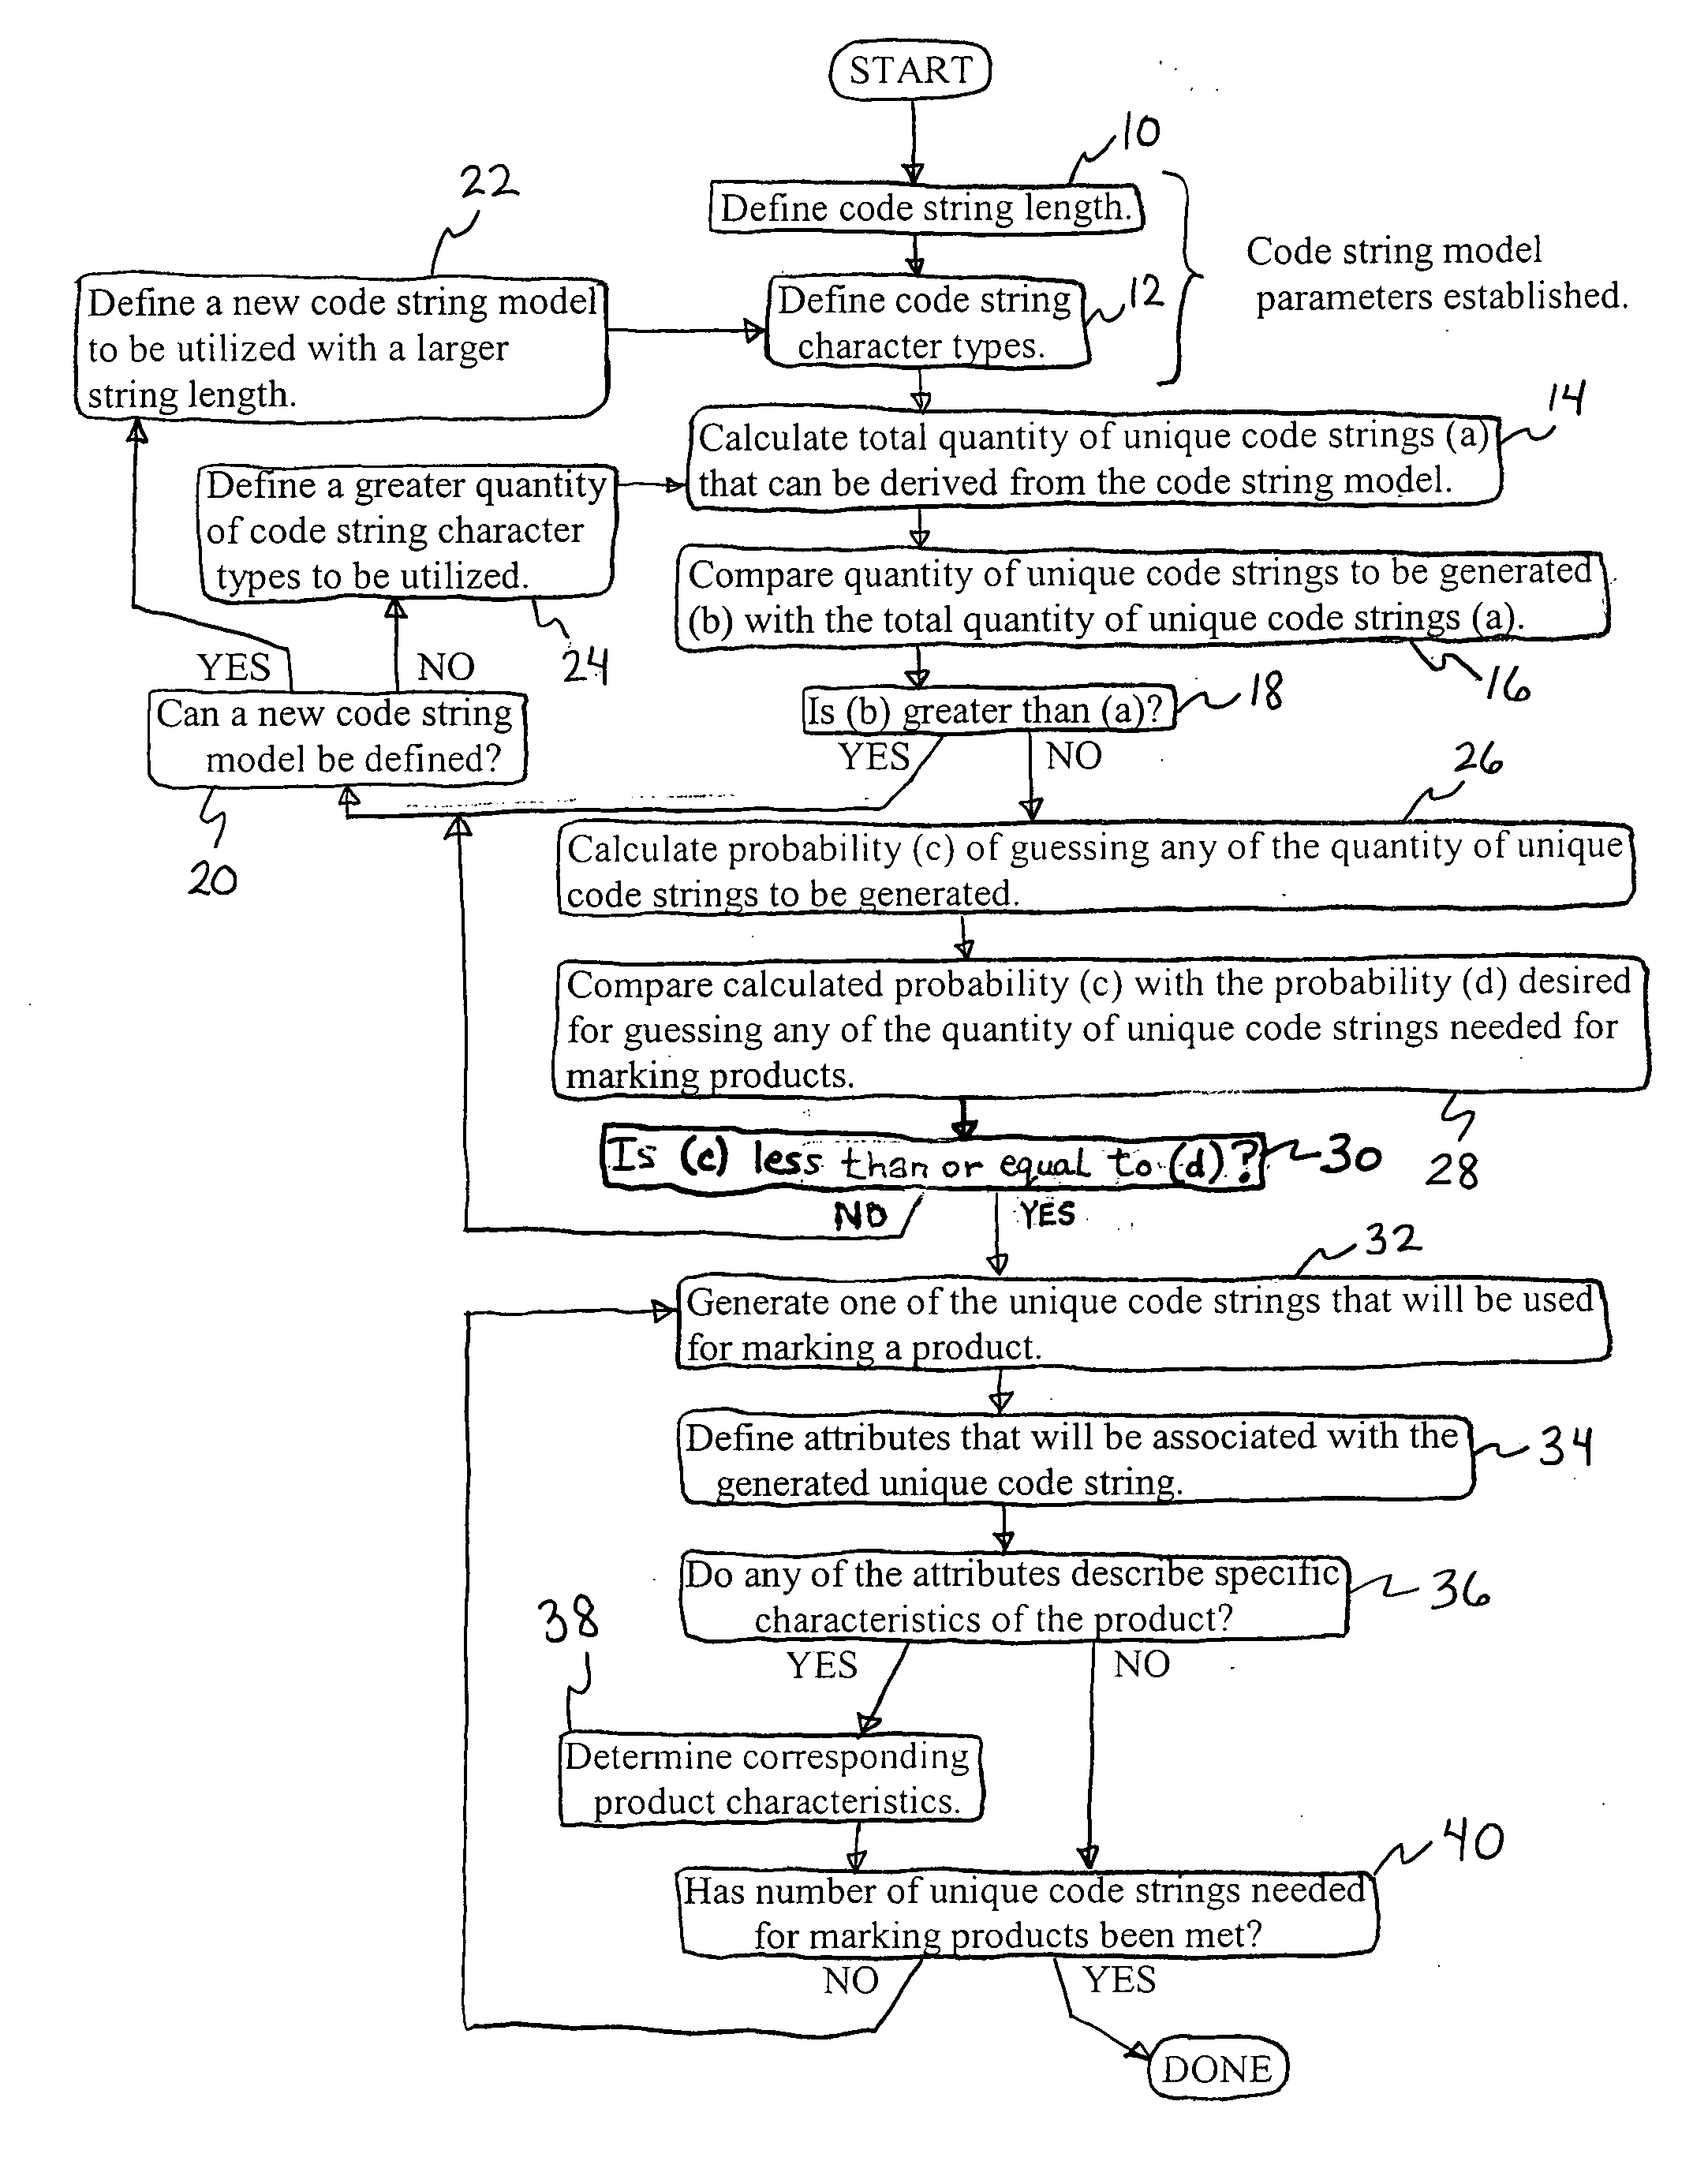 Authentication and tracking system